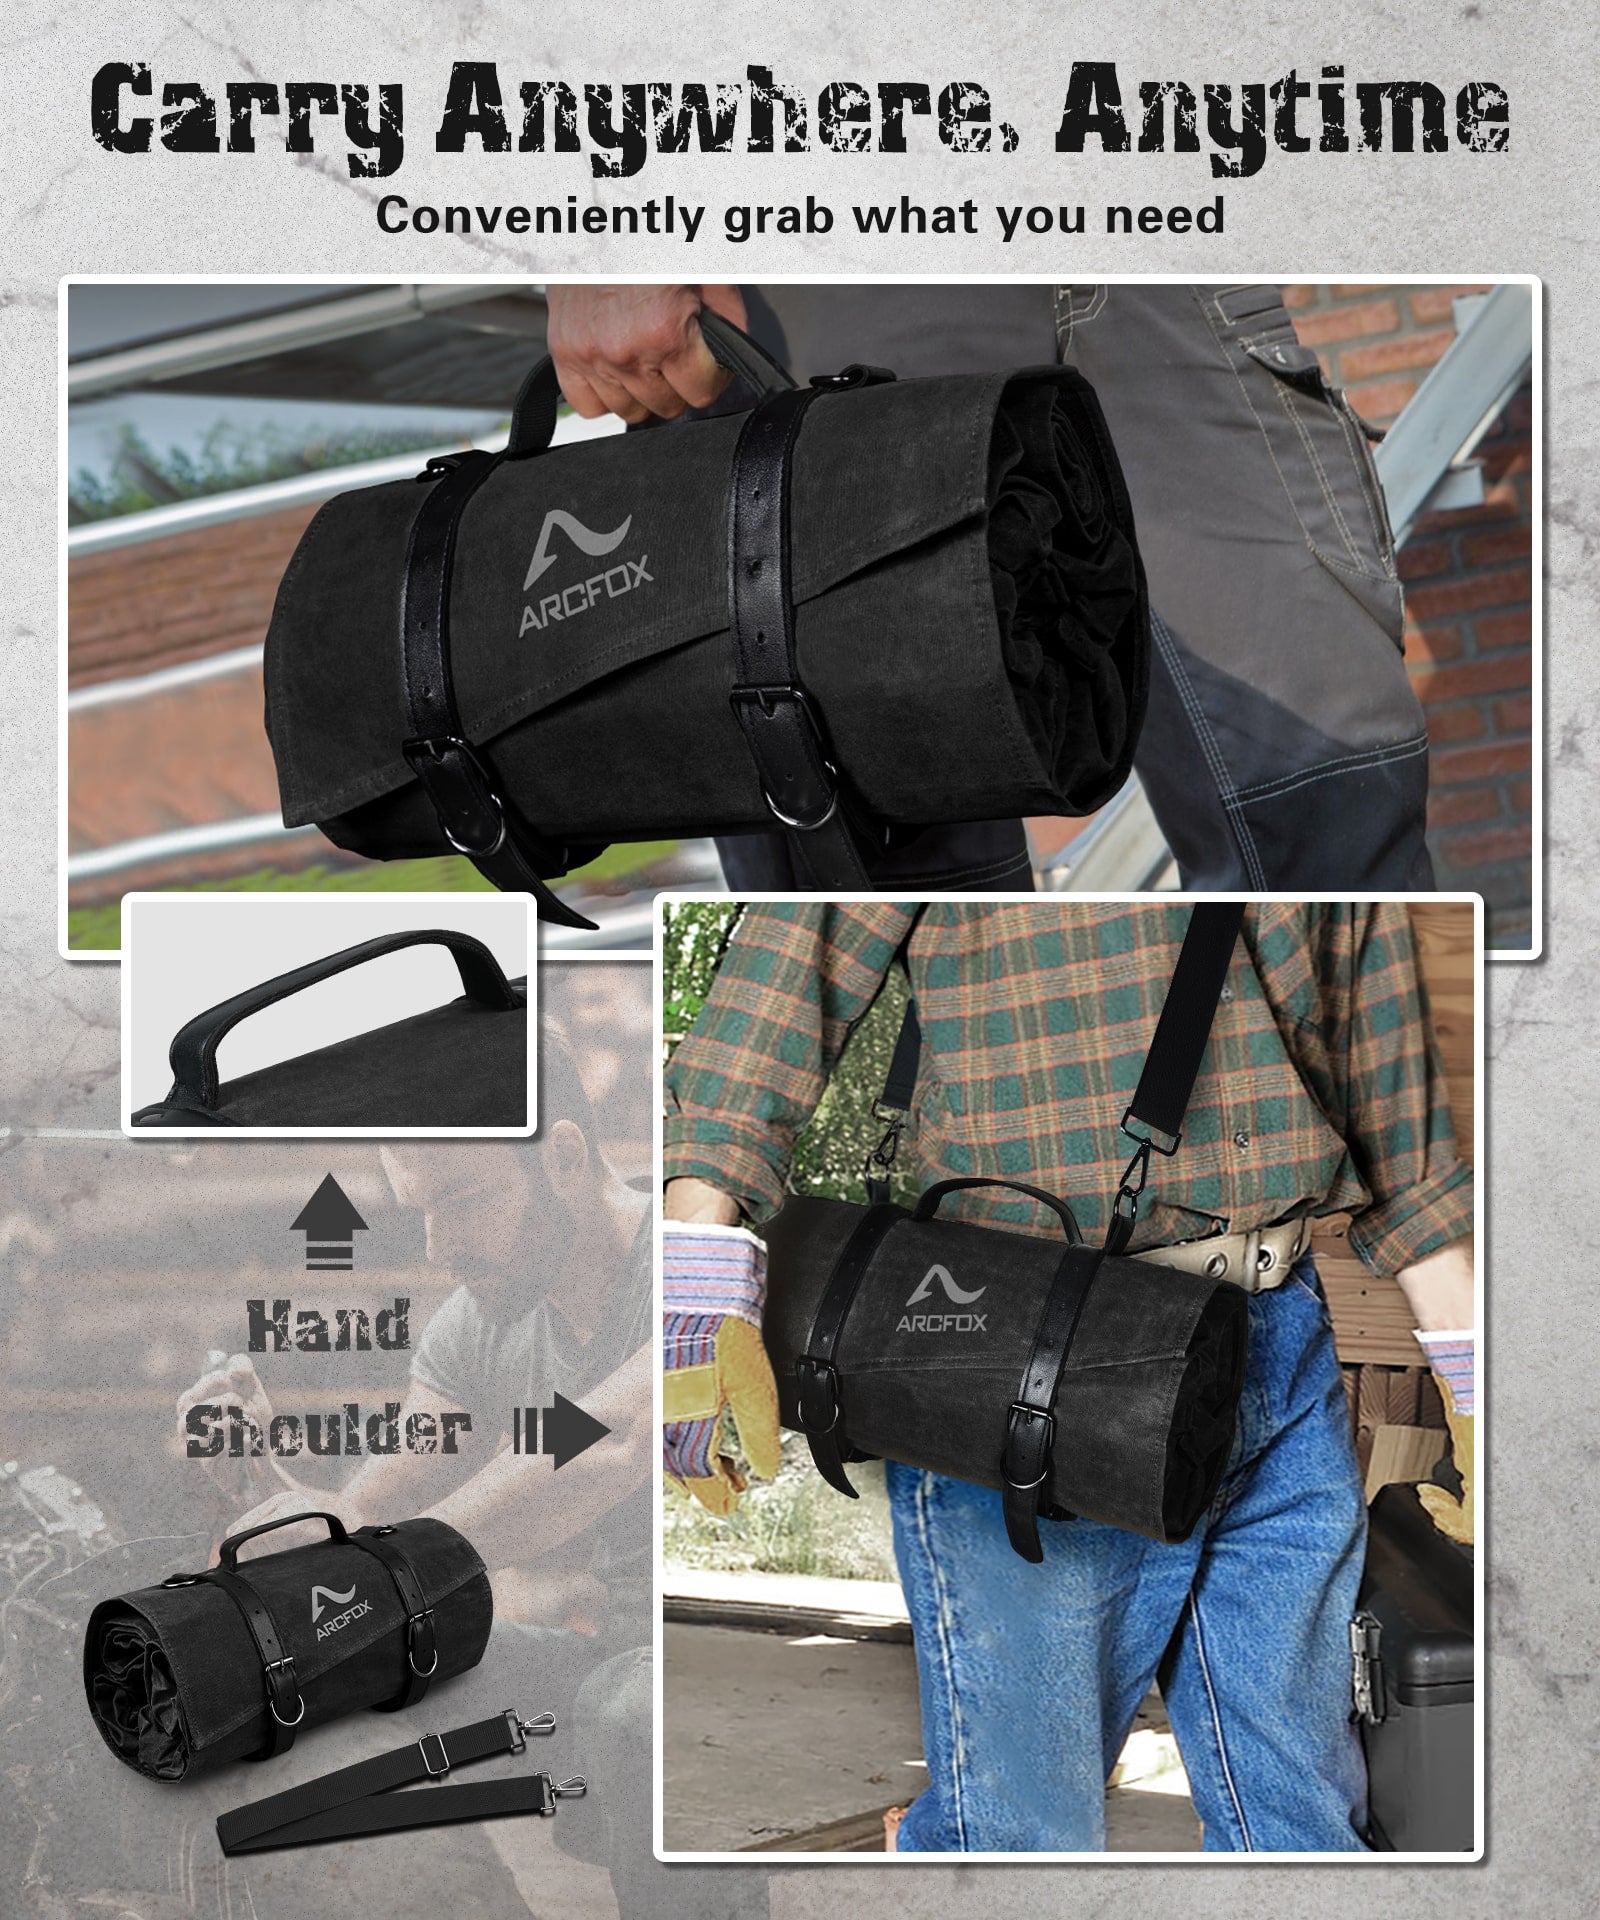 Super Roll Tool Roll,Multi-Purpose Roll Up Tool Bag, Wrench Roll,Canvas  Tool Organizer Bucket,Car First Aid Kit Wrap Roll Storage Case,Hanging Tool  Zipper Carrier Tote,Car Camping Gear - Amazon.com